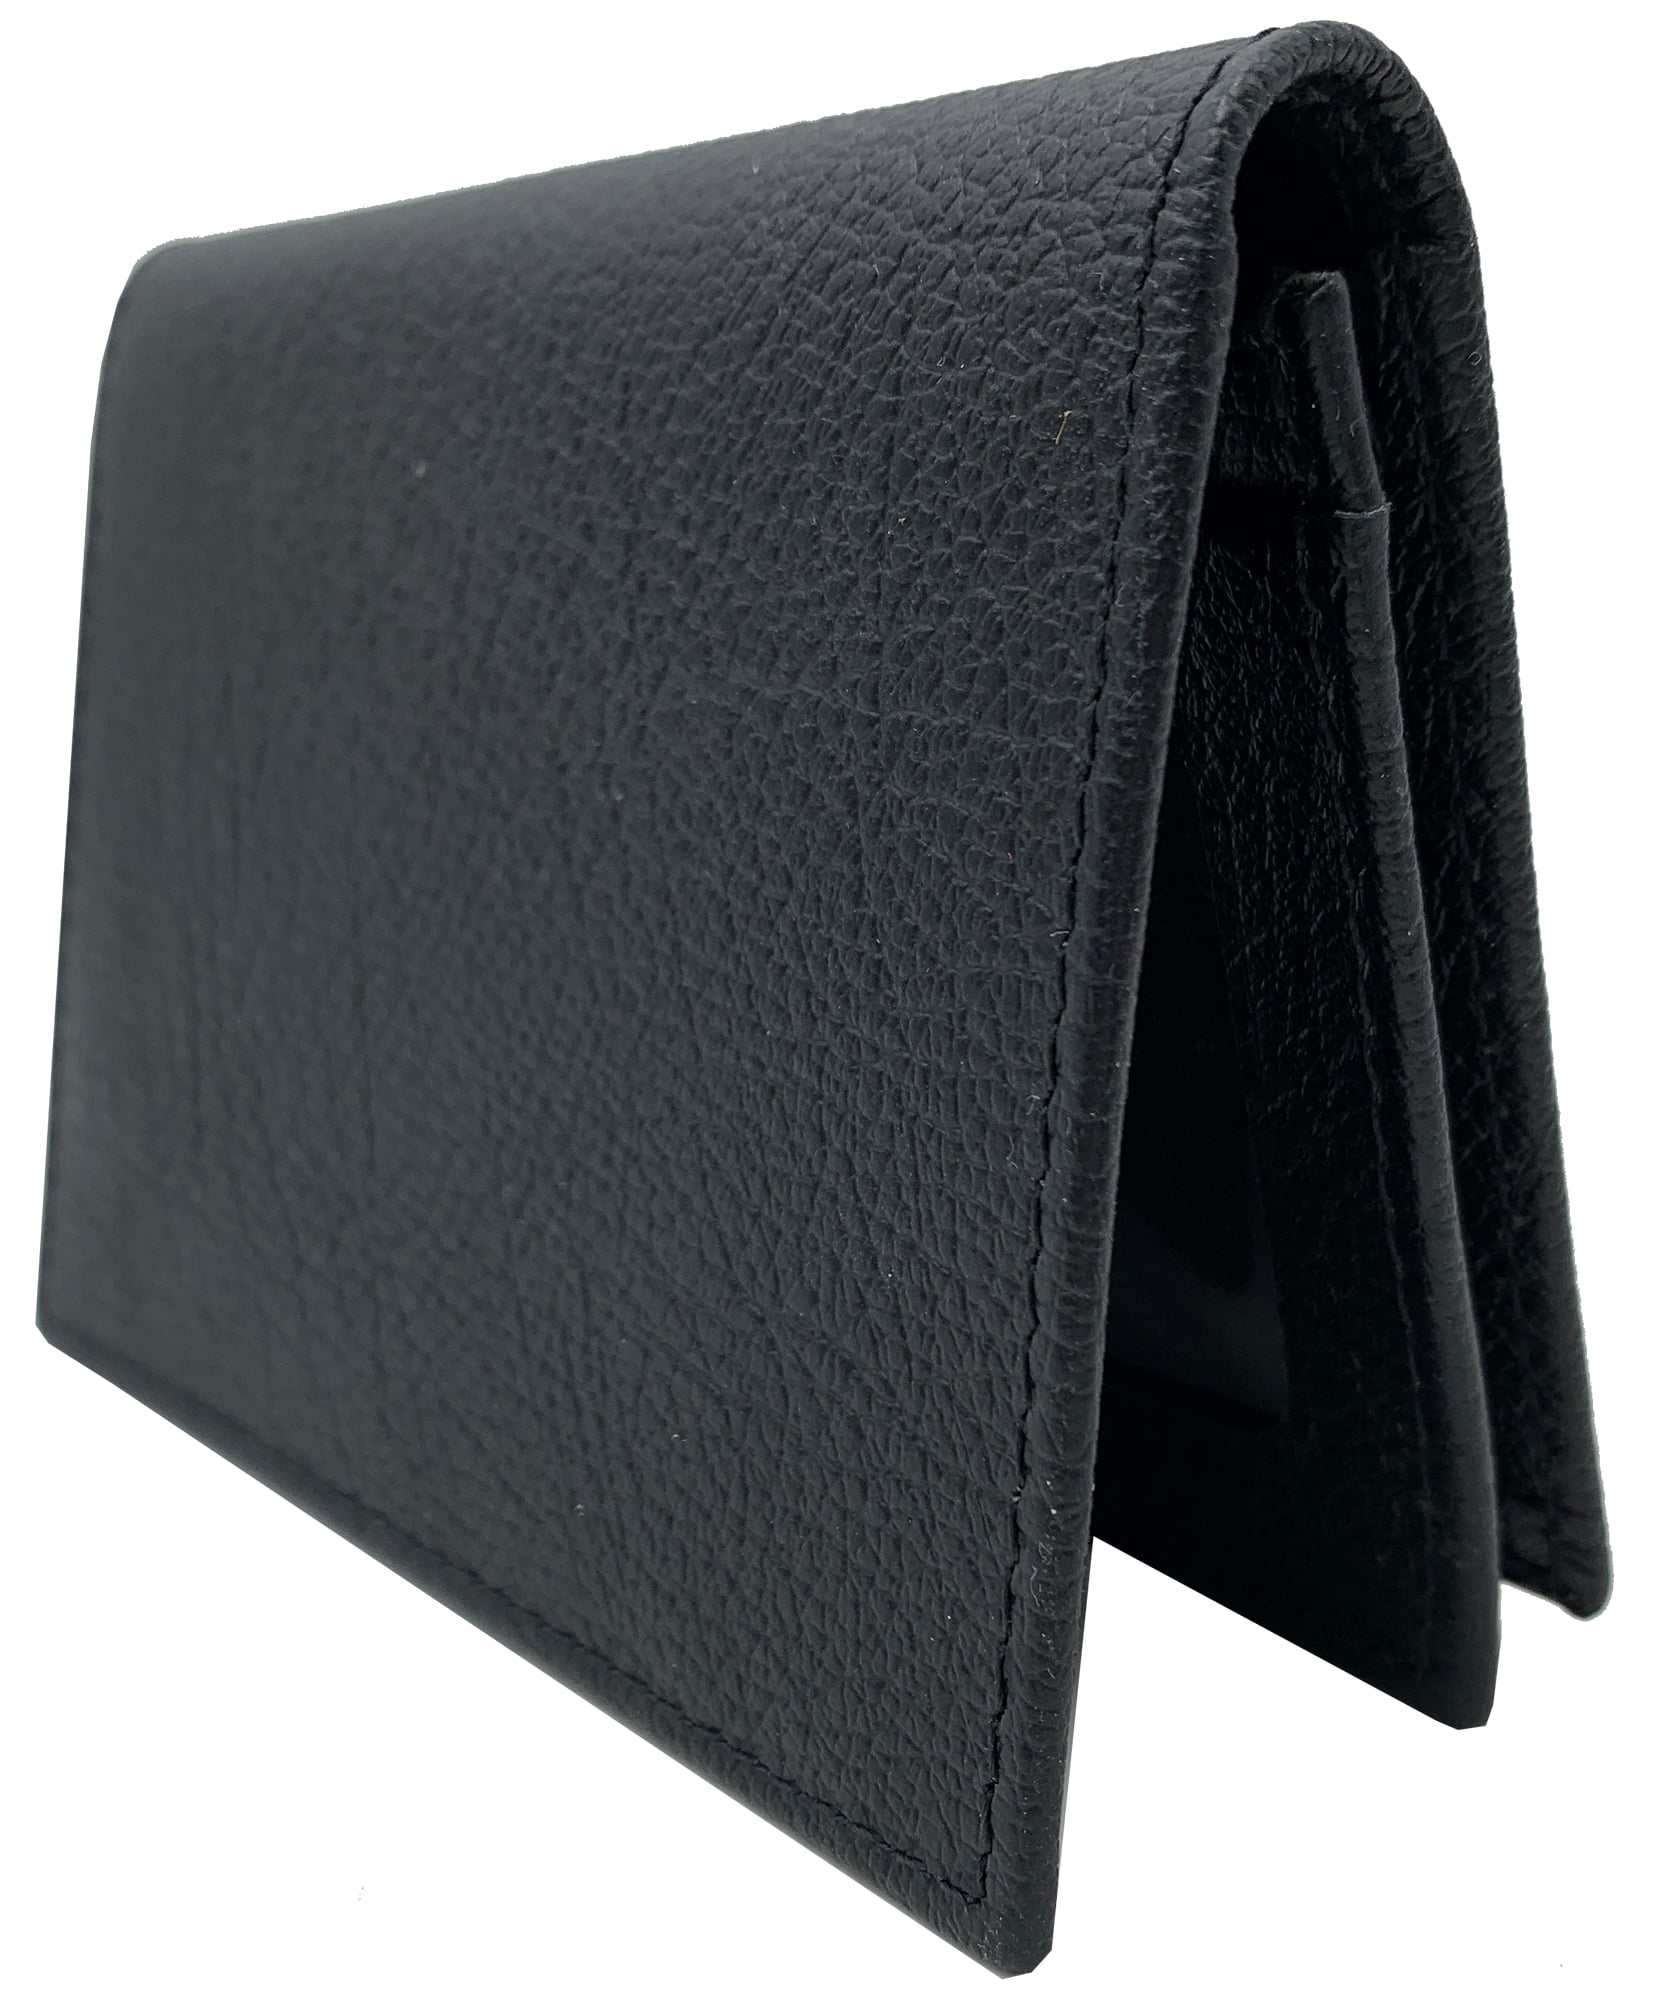 George Men's Genuine American Bison Leather Bifold Wallet with